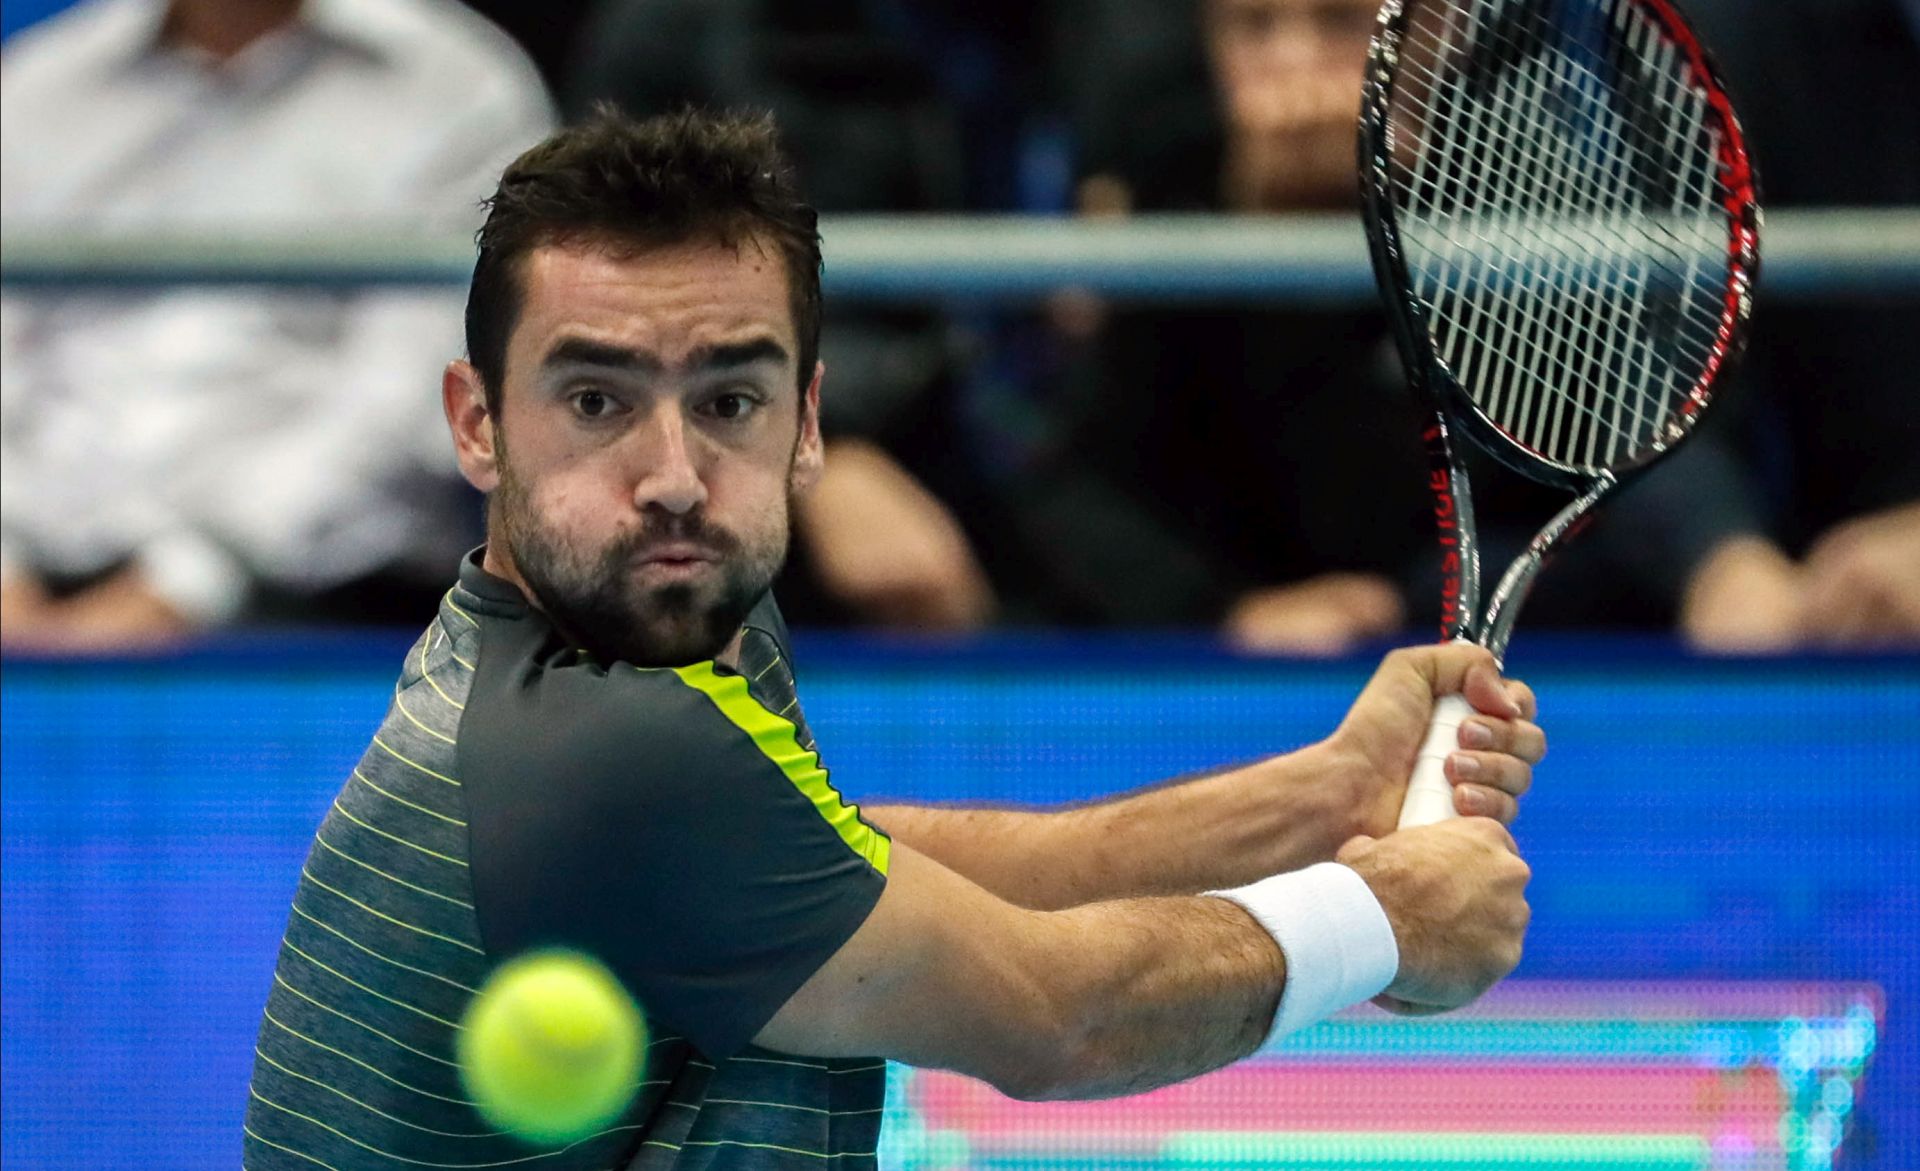 epa07934454 Marin Cilic of Croatia in action during his semifinal match against Andrey Rublev of Russia at the Kremlin Cup tennis tournament in Moscow, Russia, 19 October 2019.  EPA/YURI KOCHETKOV